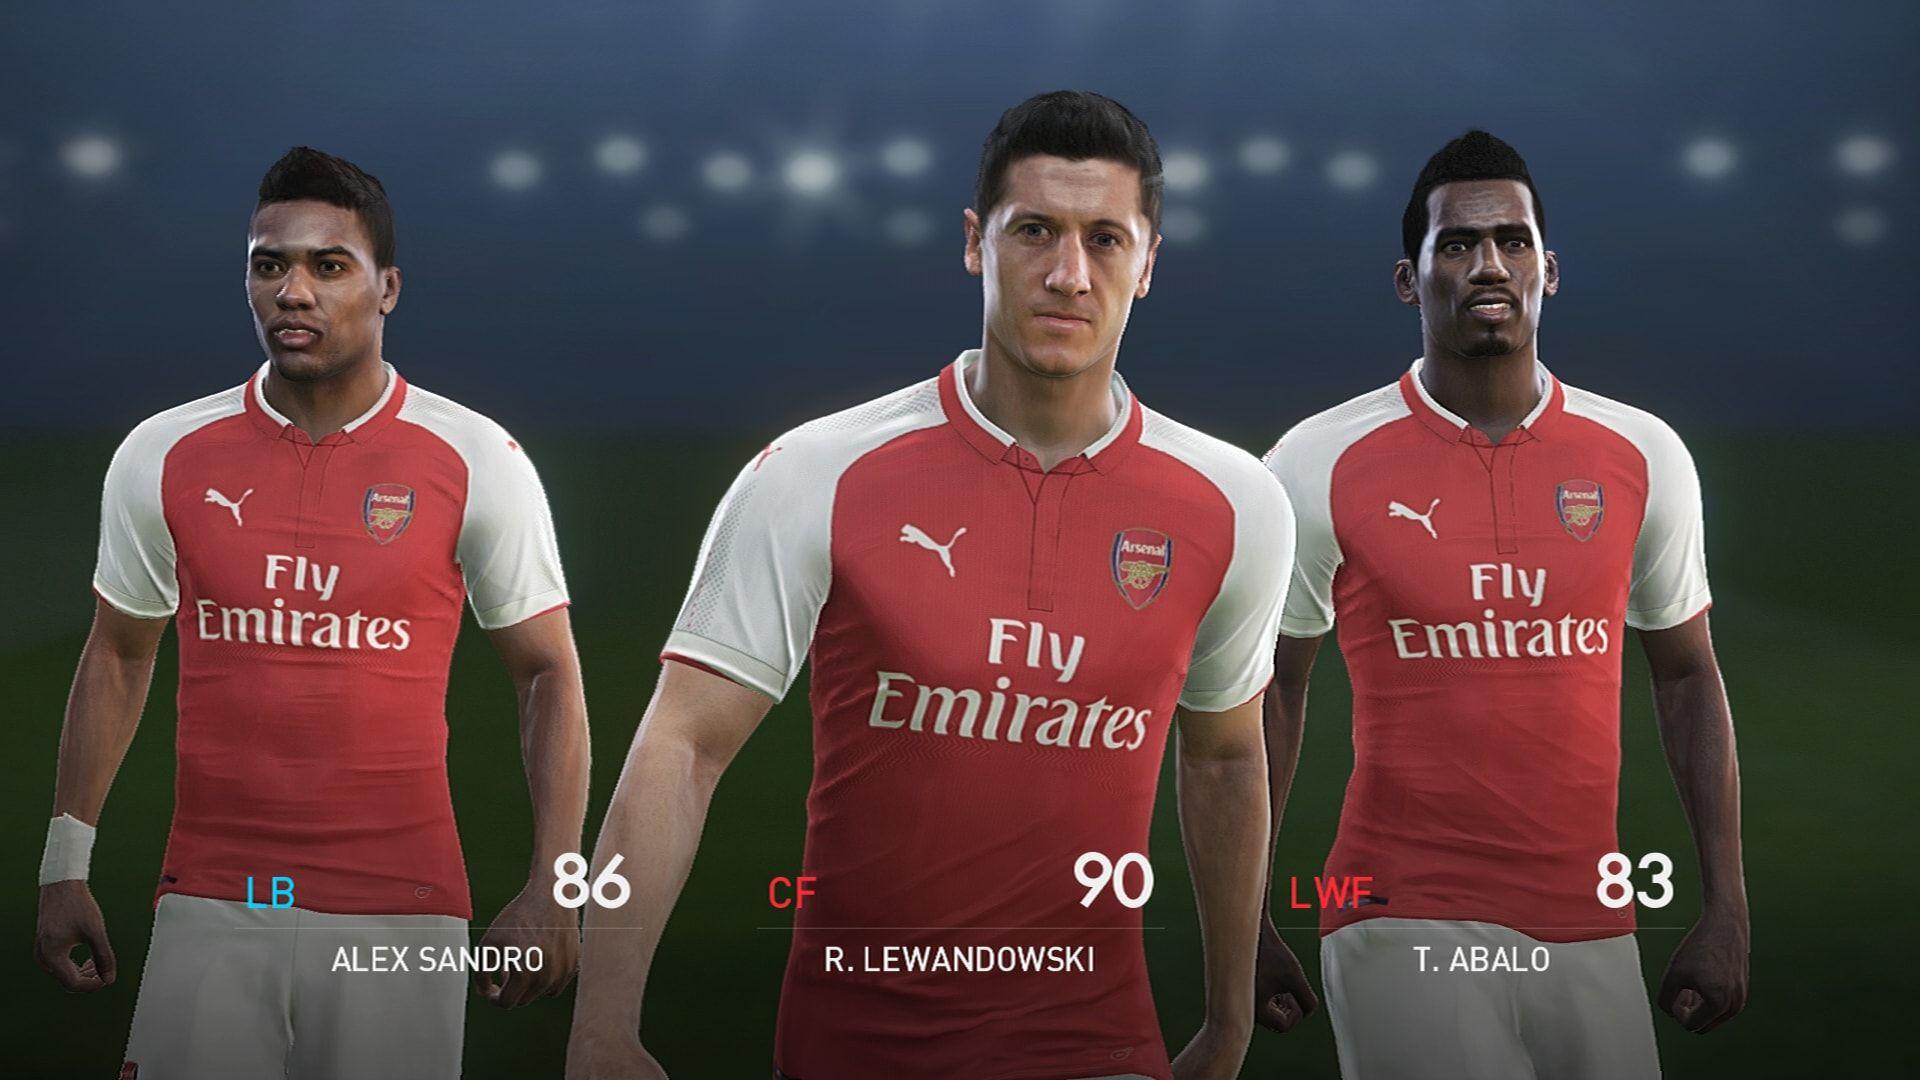 KONAMI to Become Official Partner of Arsenal FC